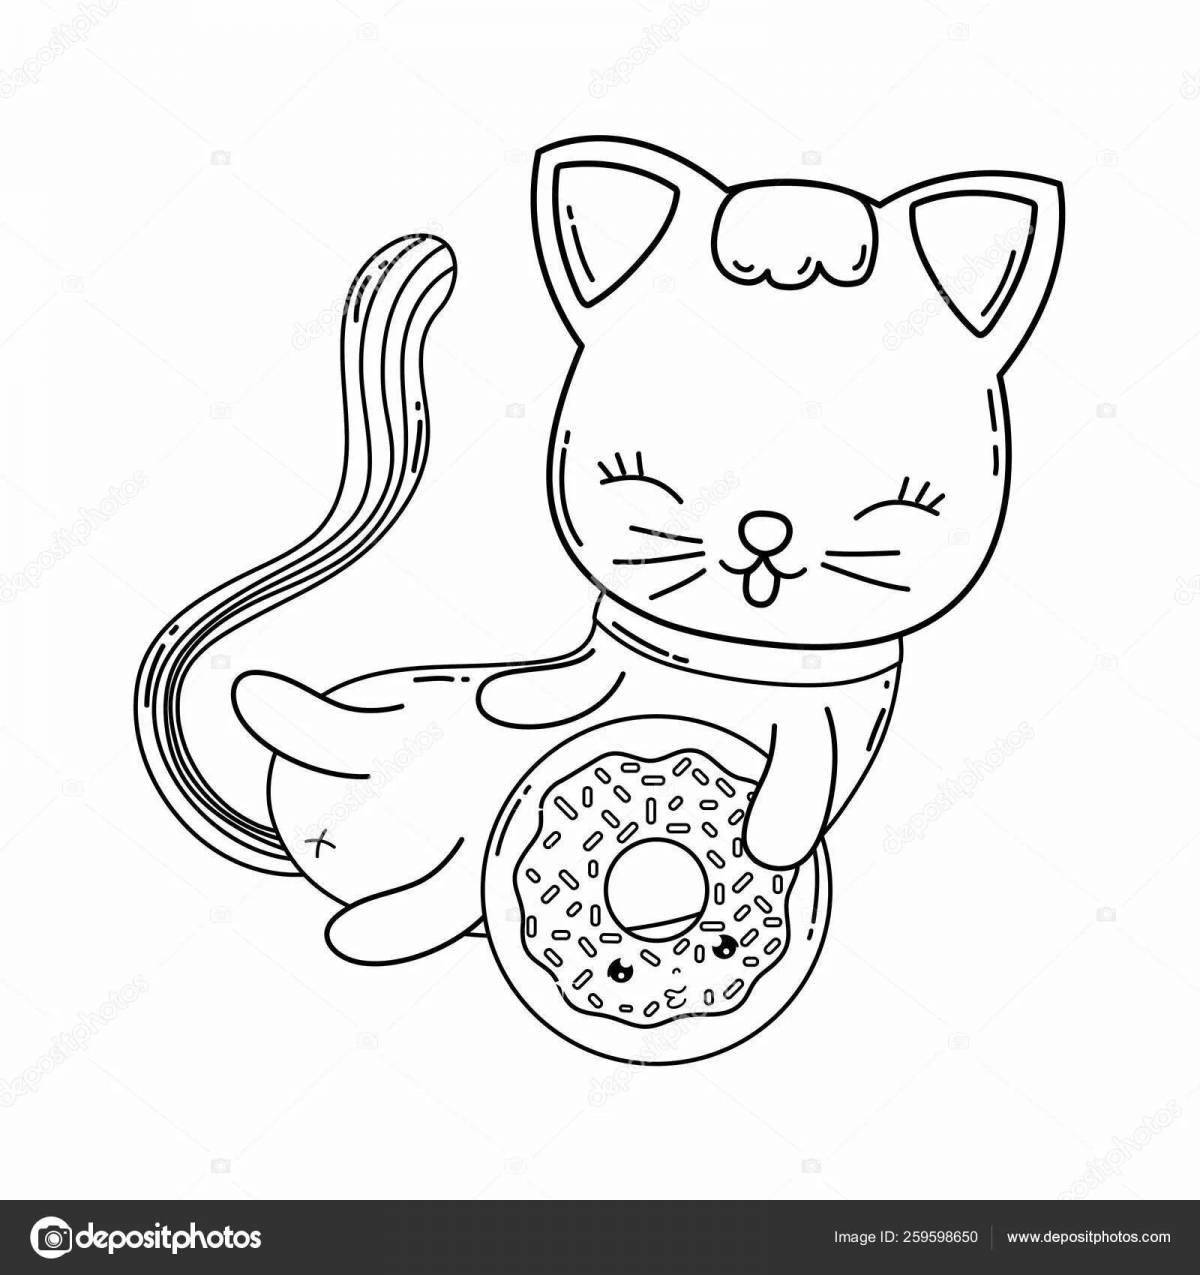 Gorgeous donut cat coloring page